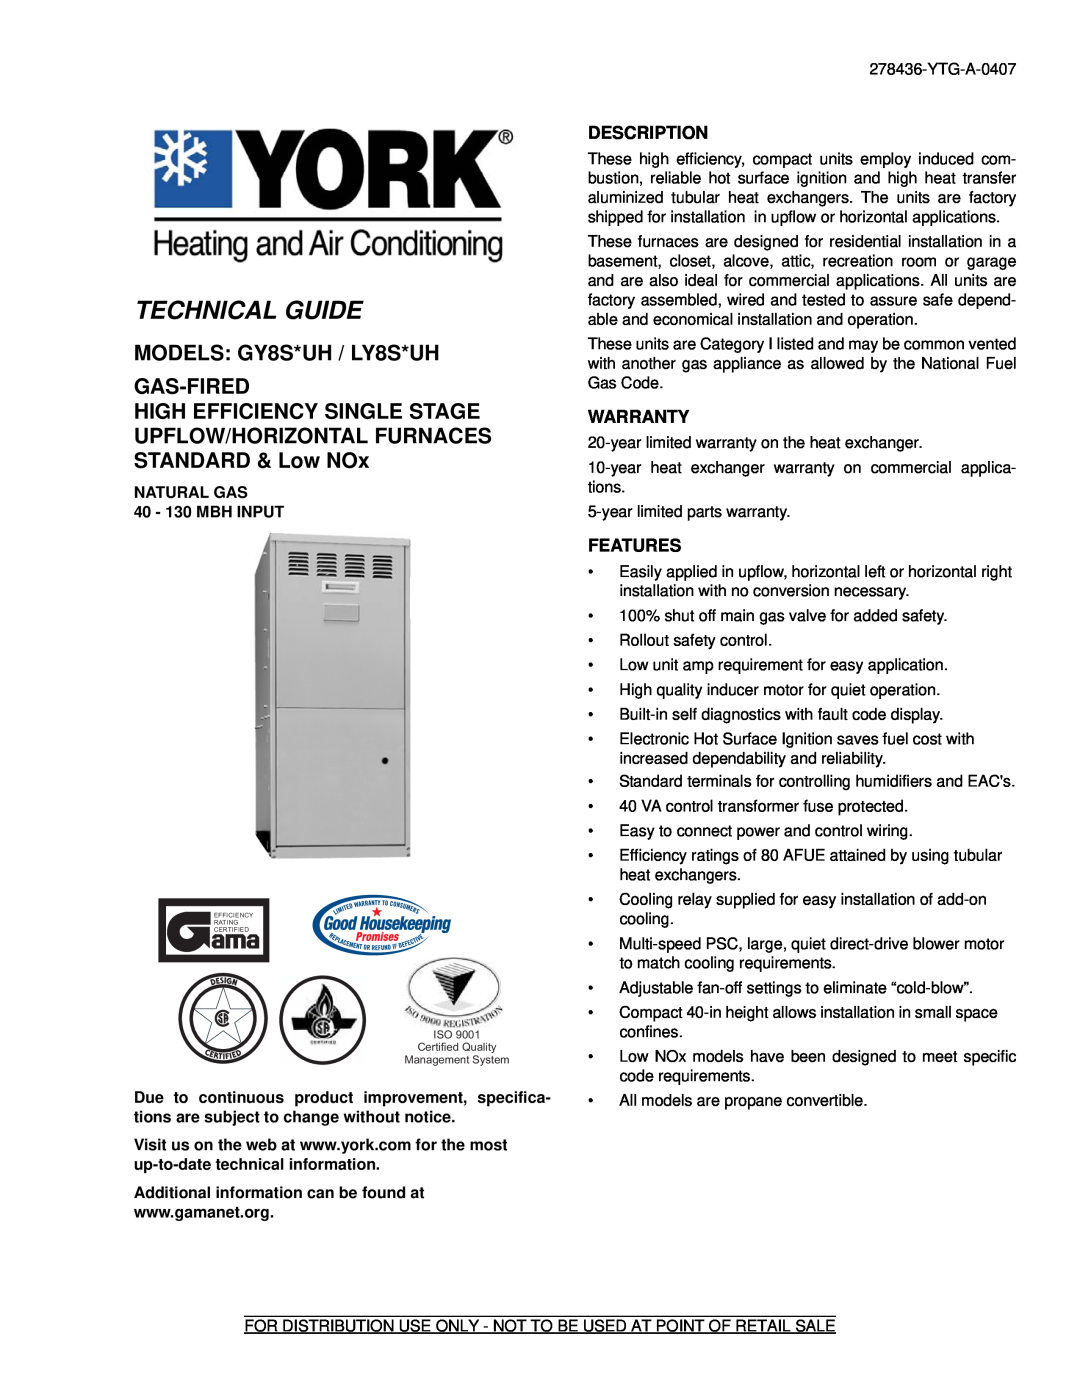 York warranty Description, Warranty, Features, Technical Guide, MODELS GY8S*UH / LY8S*UH GAS-FIRED 